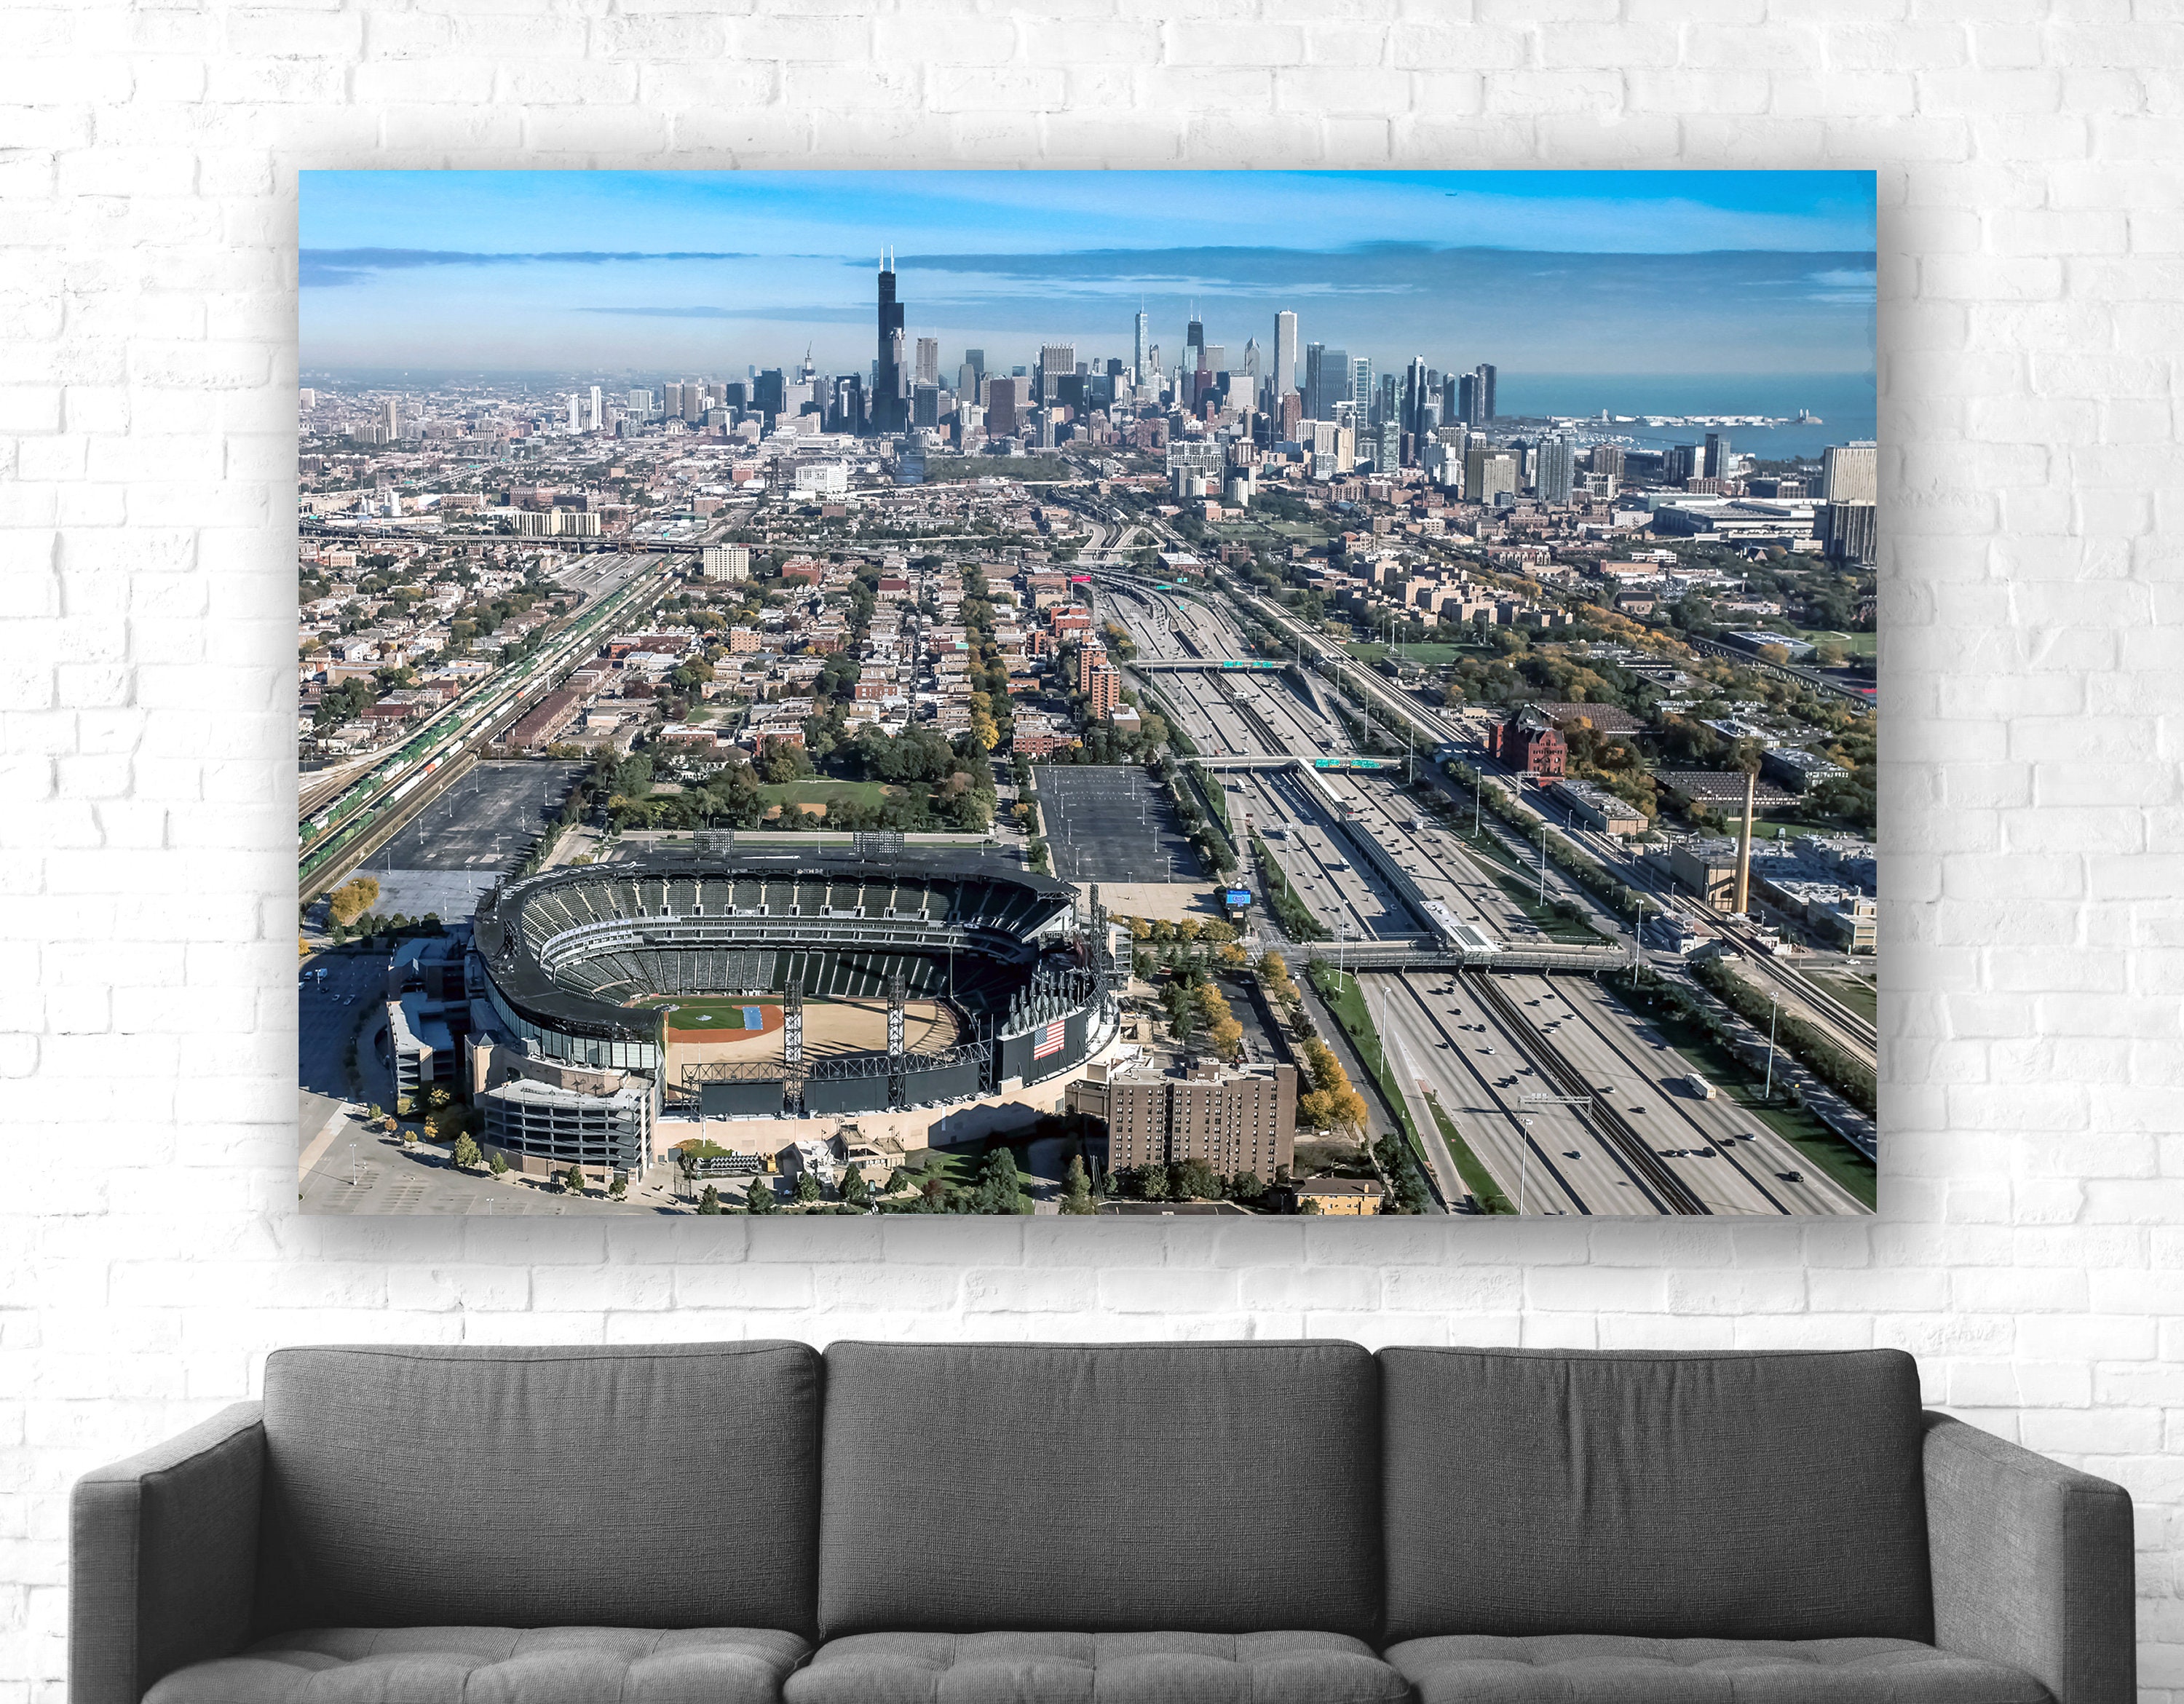 Chicago White Sox/U.S. Cellular Field Wall Mural, Sky Box Sports Scenes